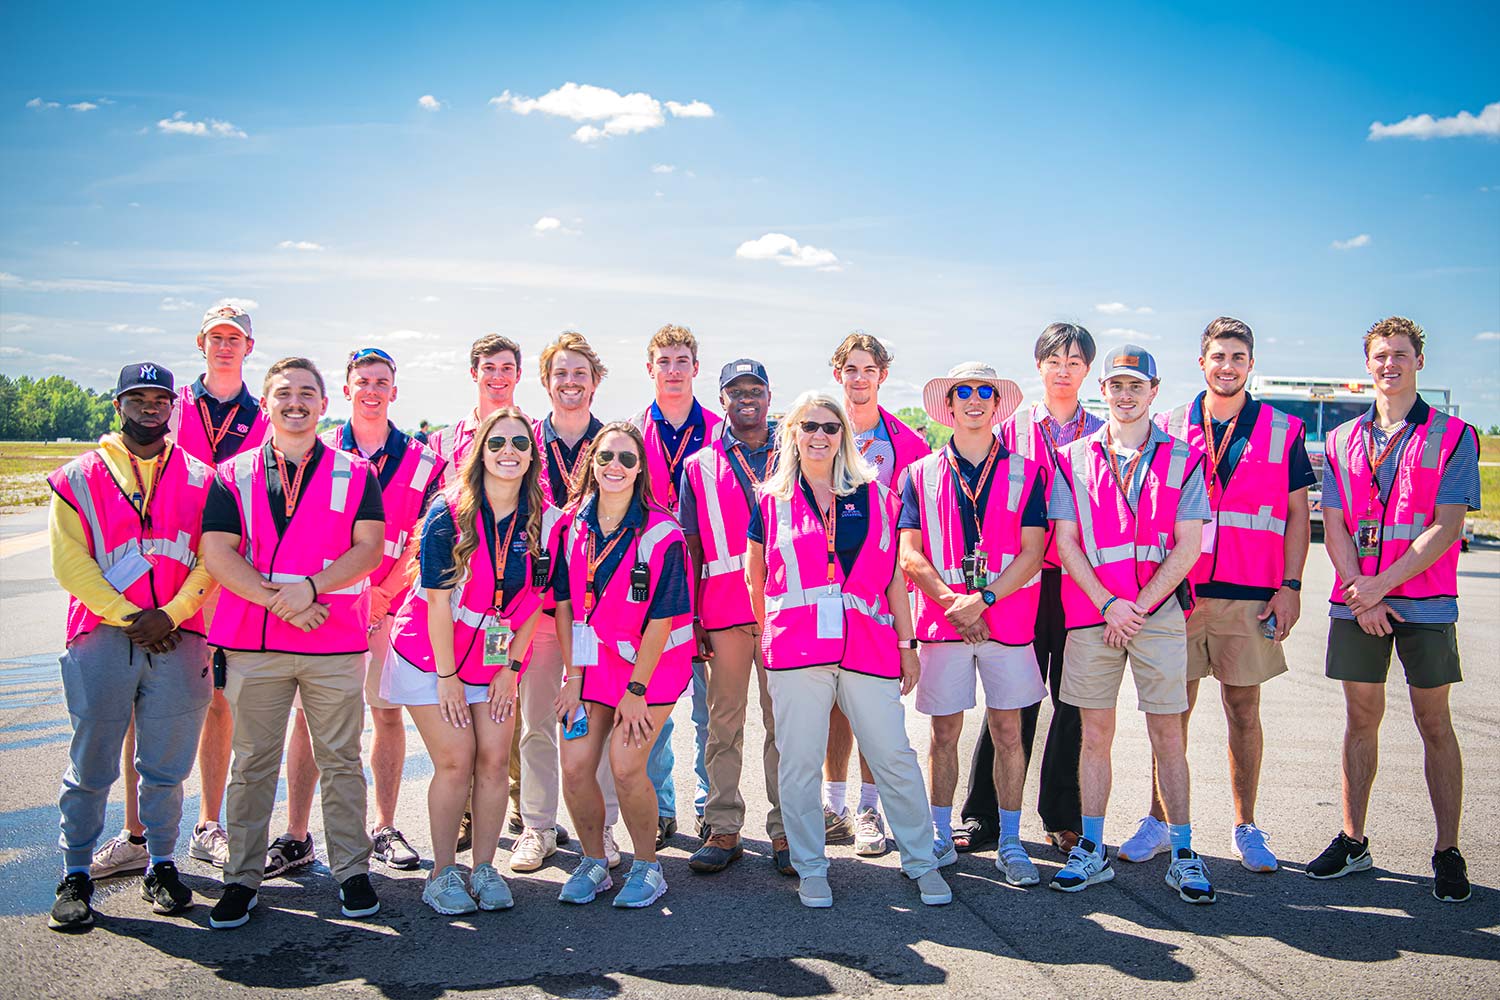 Auburn aviation students posing for group photo all in matching bright pink safety vests